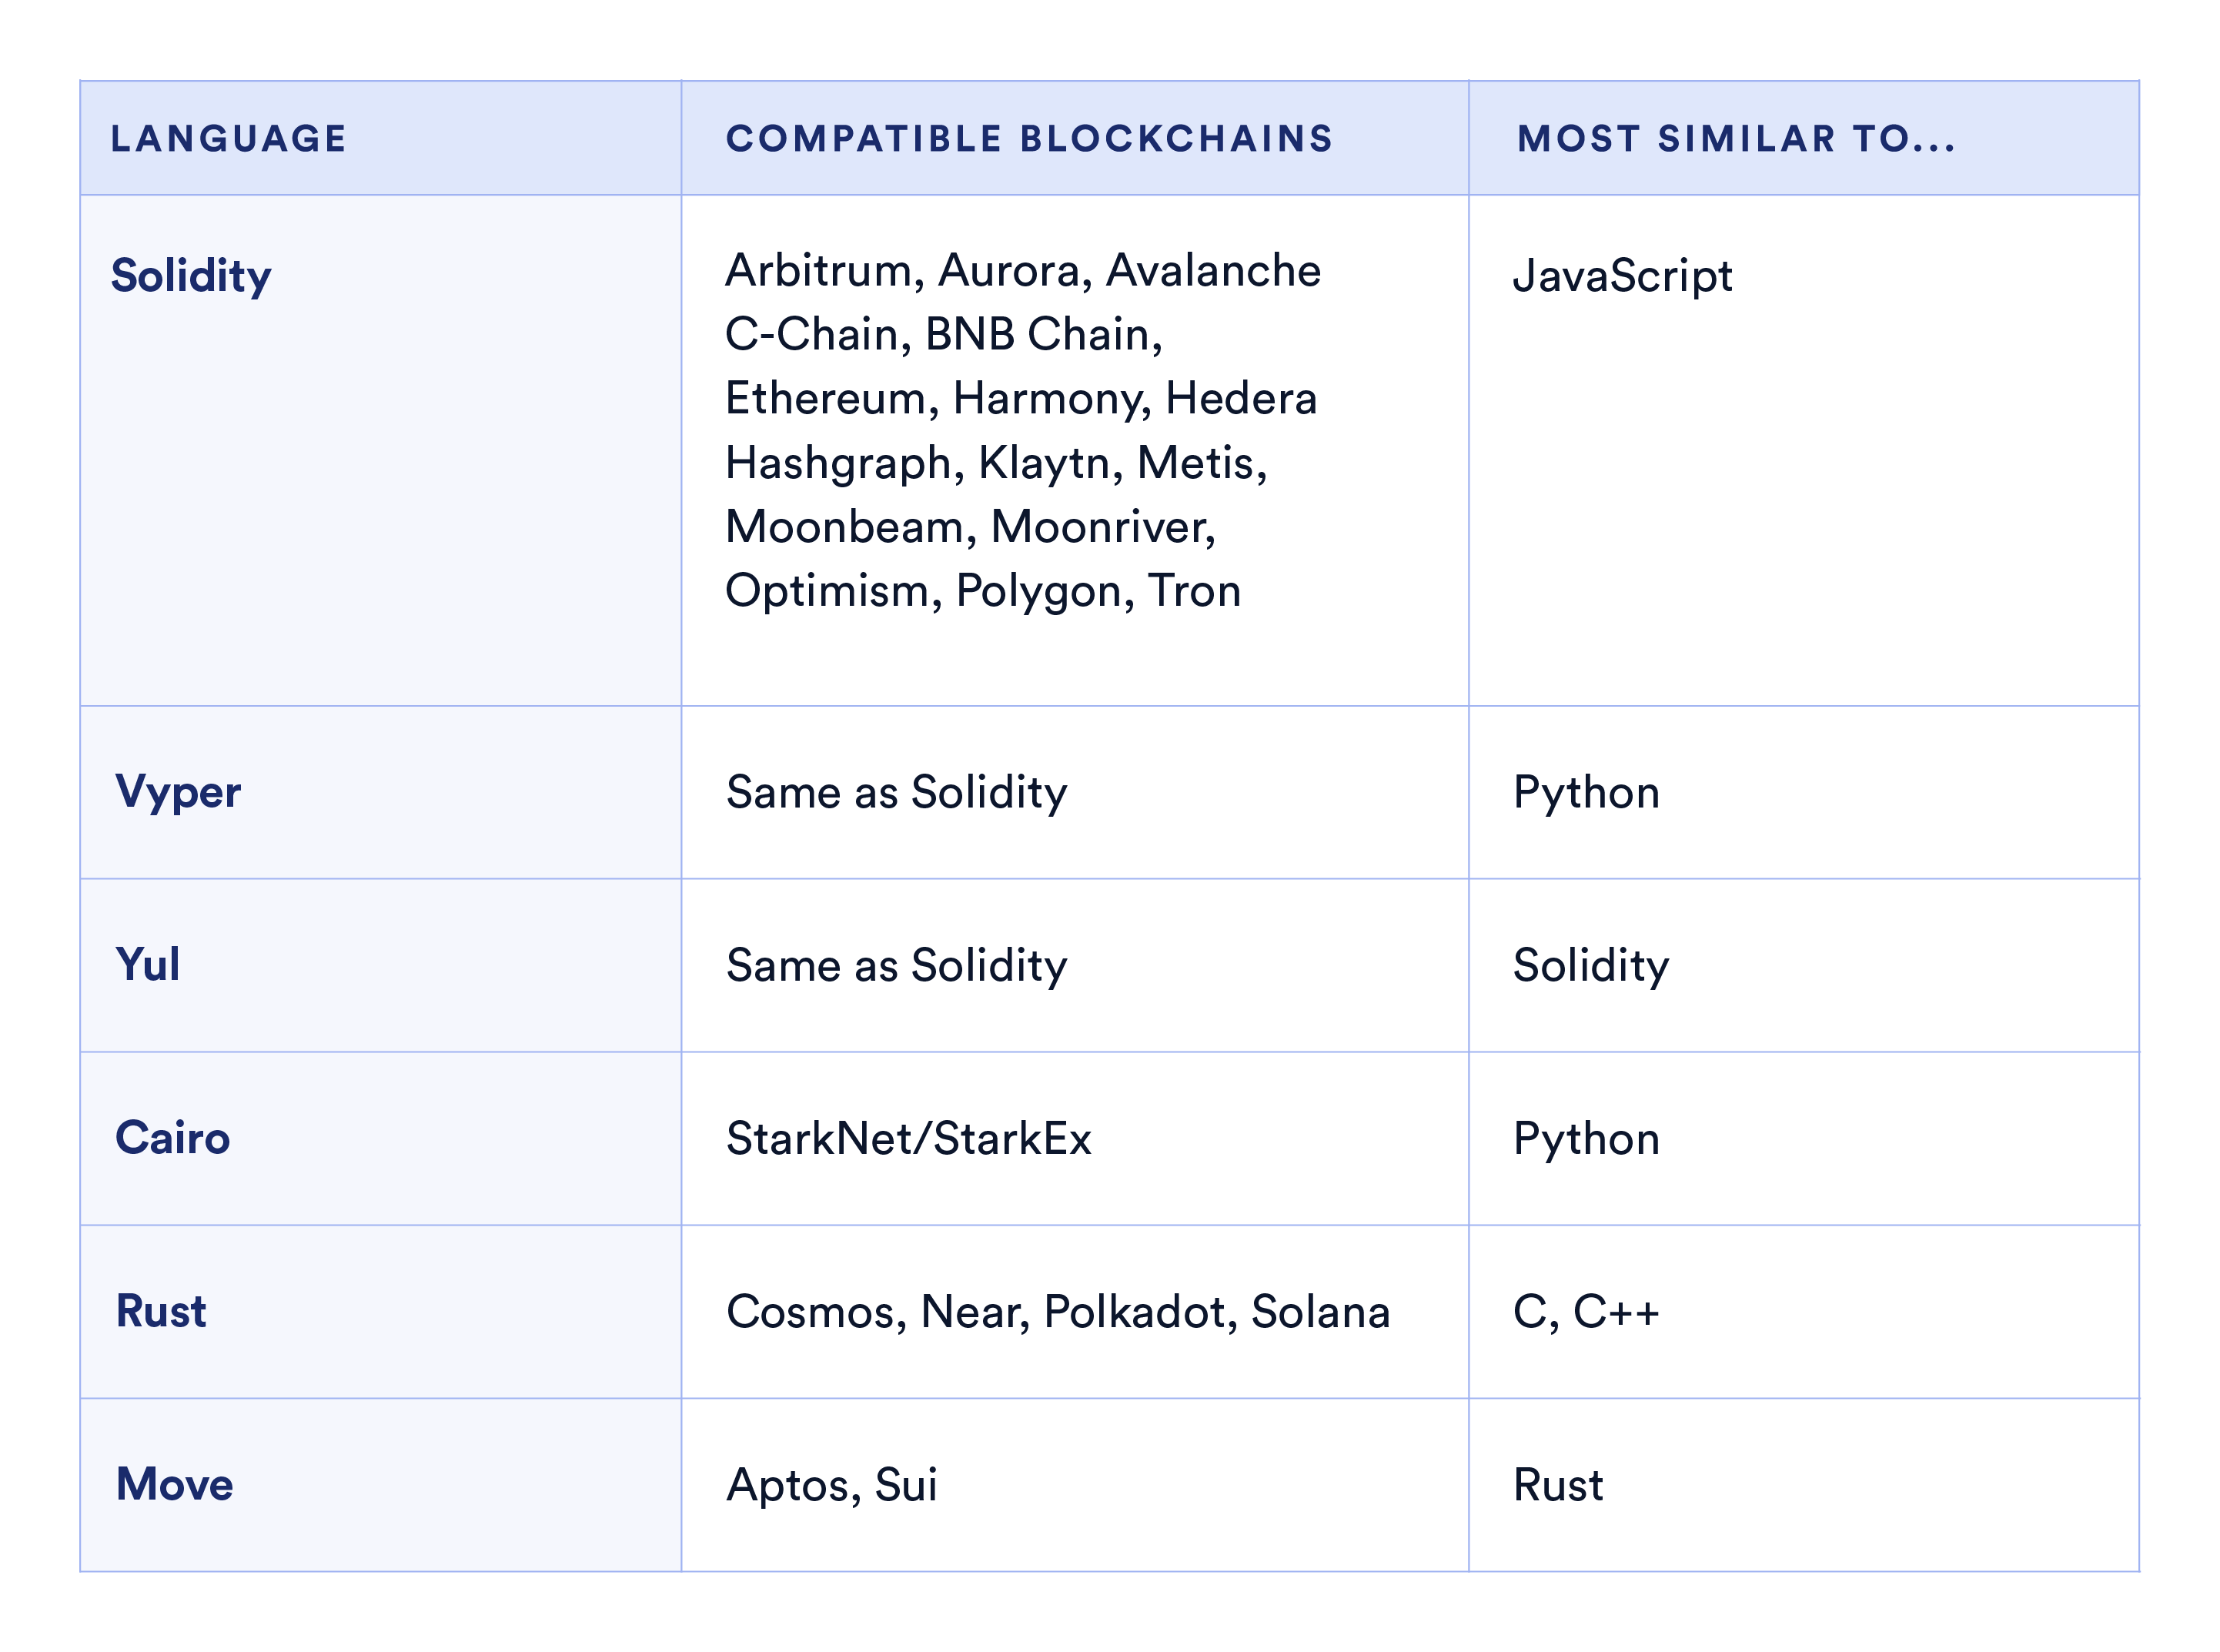 A chart showcasing top smart contract languages, the blockchains they're compatible with, and the language it's most similar to.